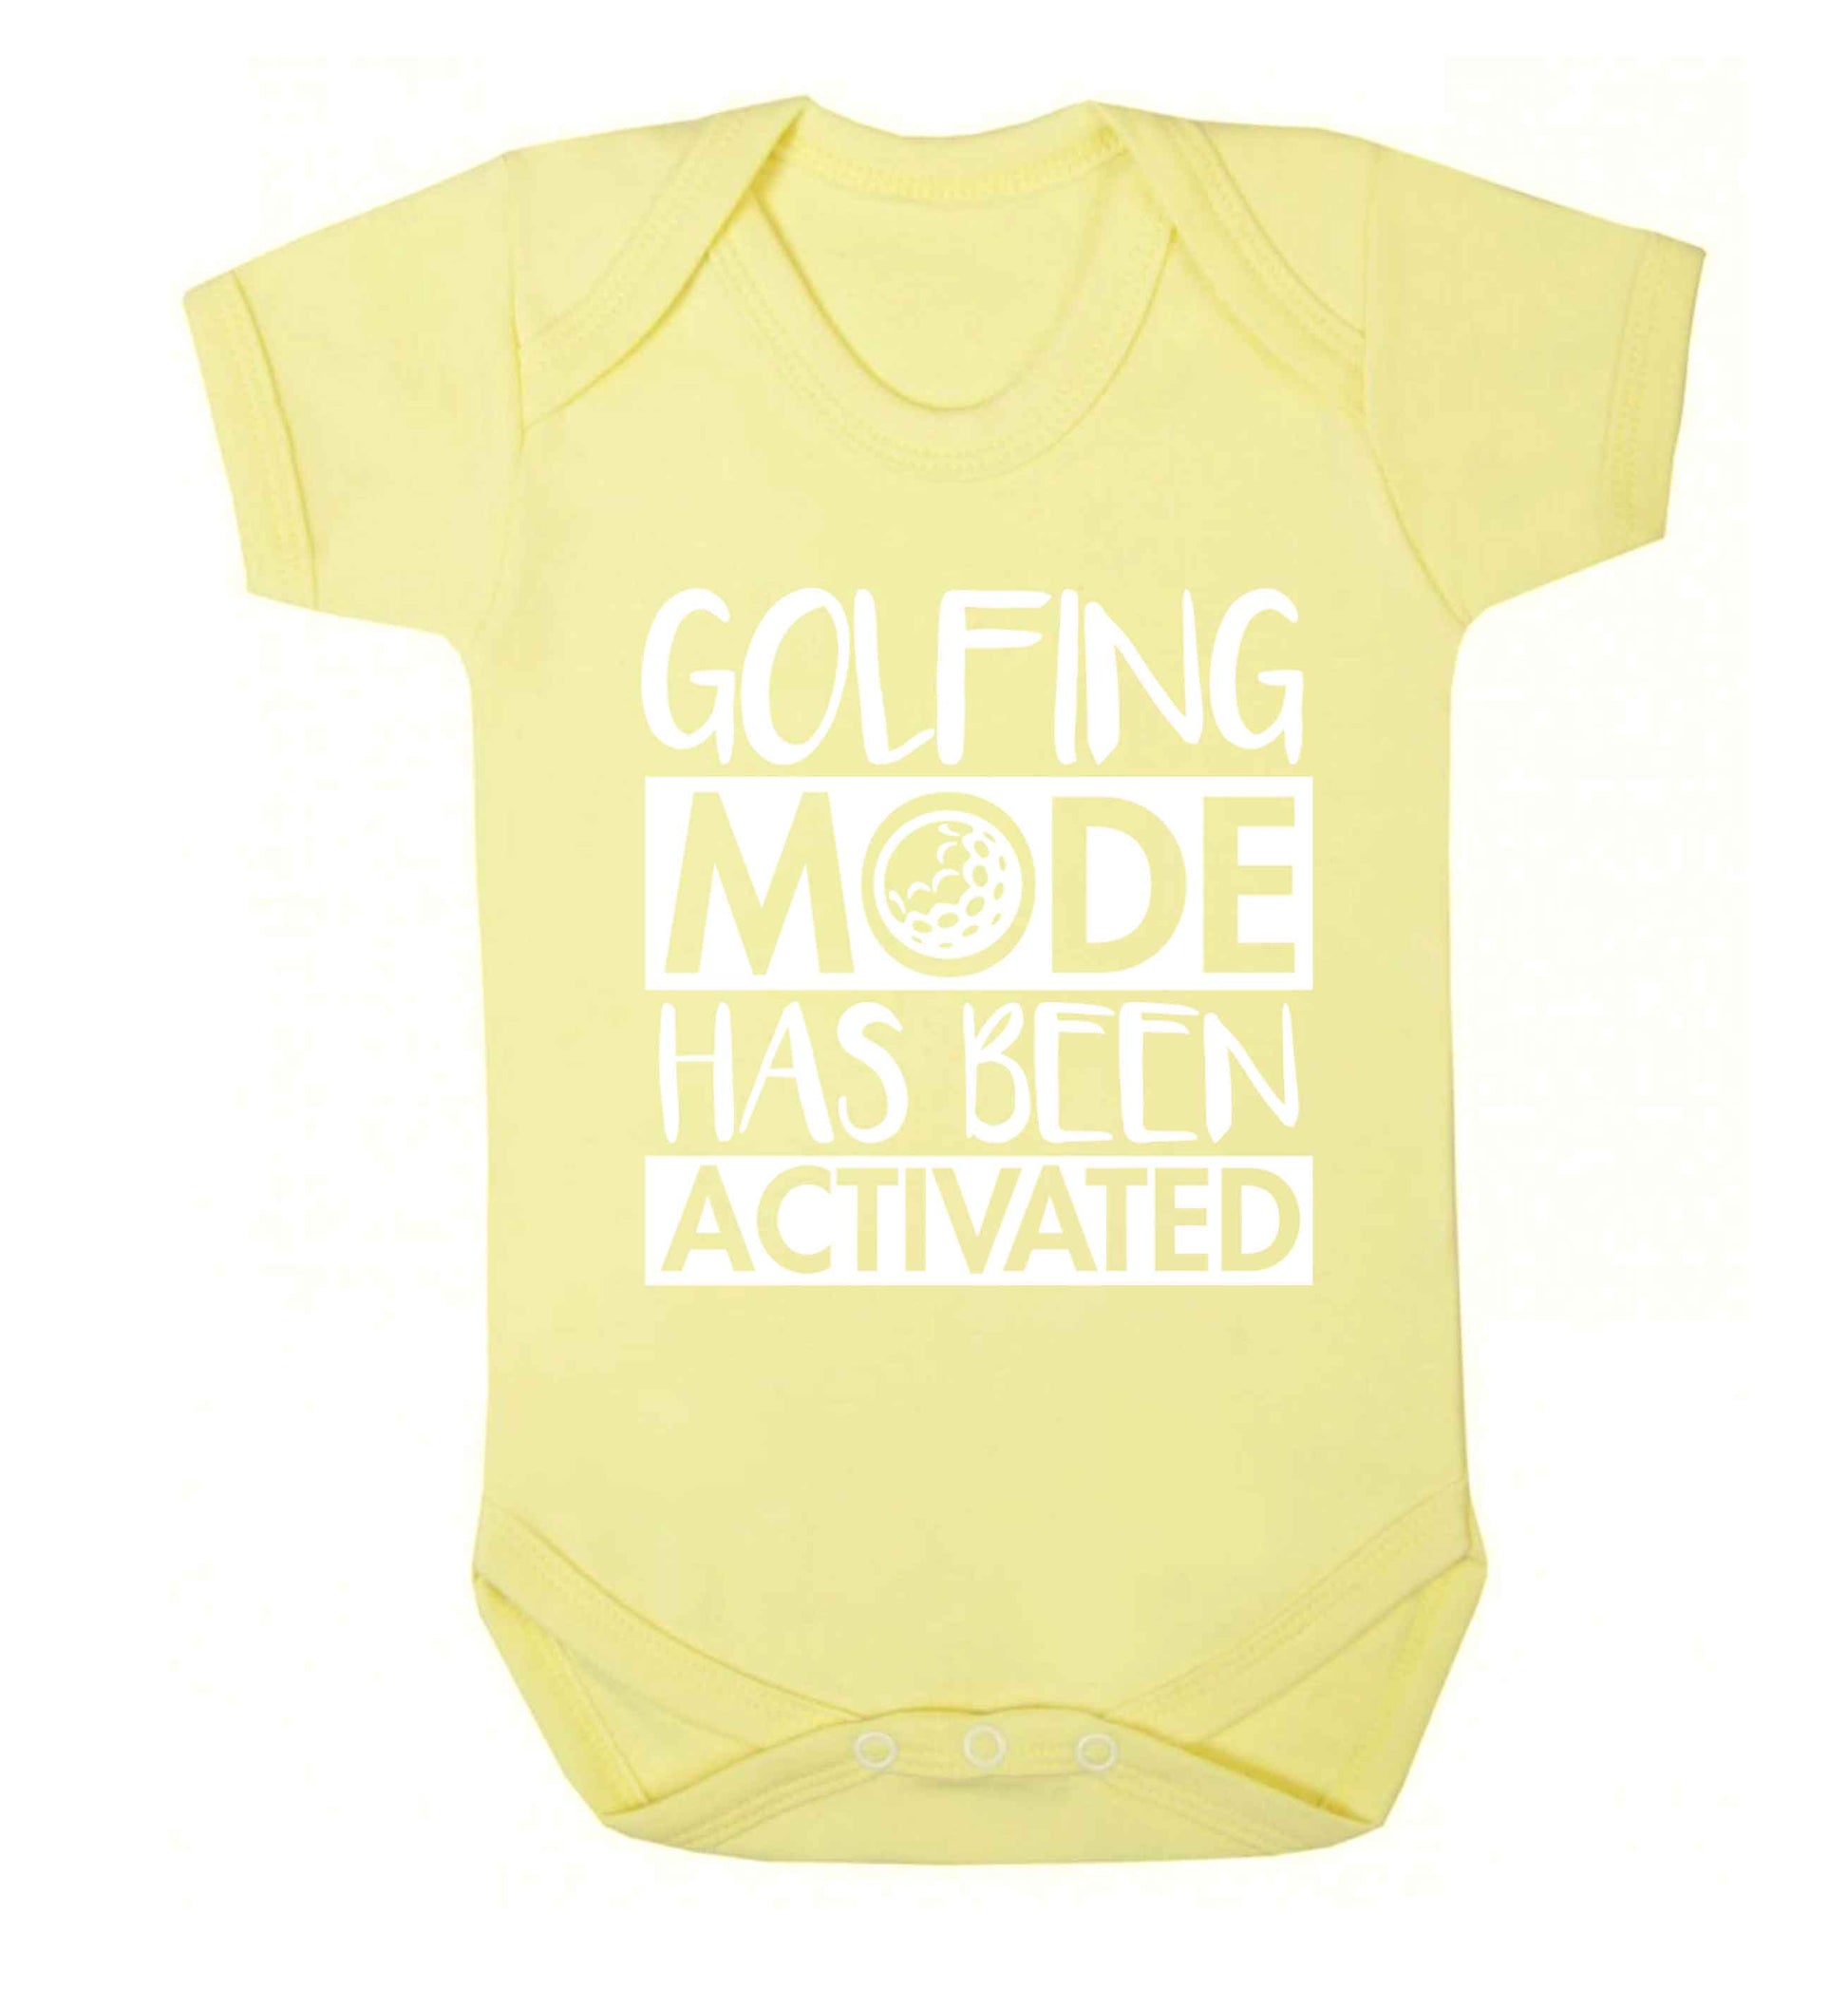 Golfing mode has been activated Baby Vest pale yellow 18-24 months